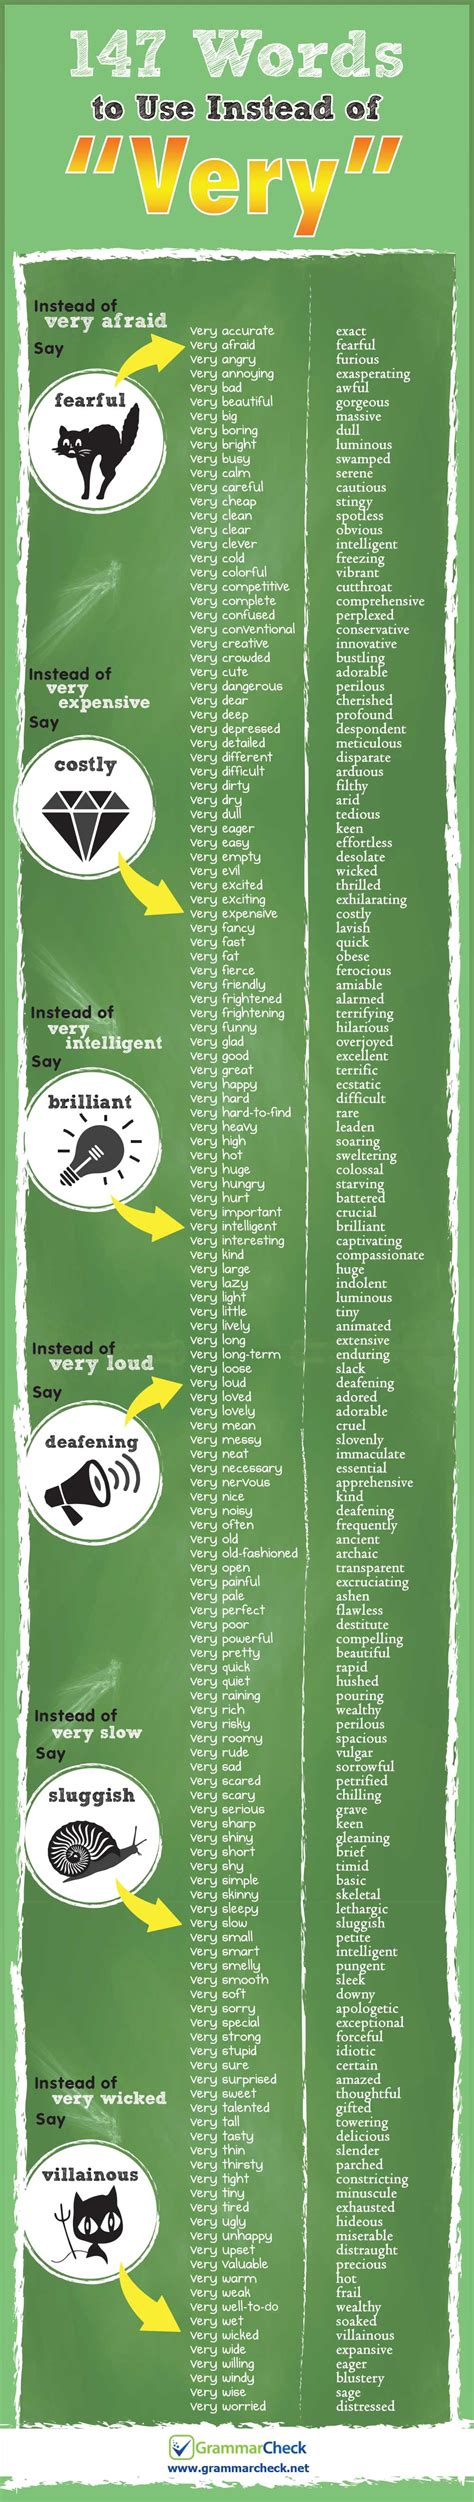 147 Words To Use Instead Of Very Infographic